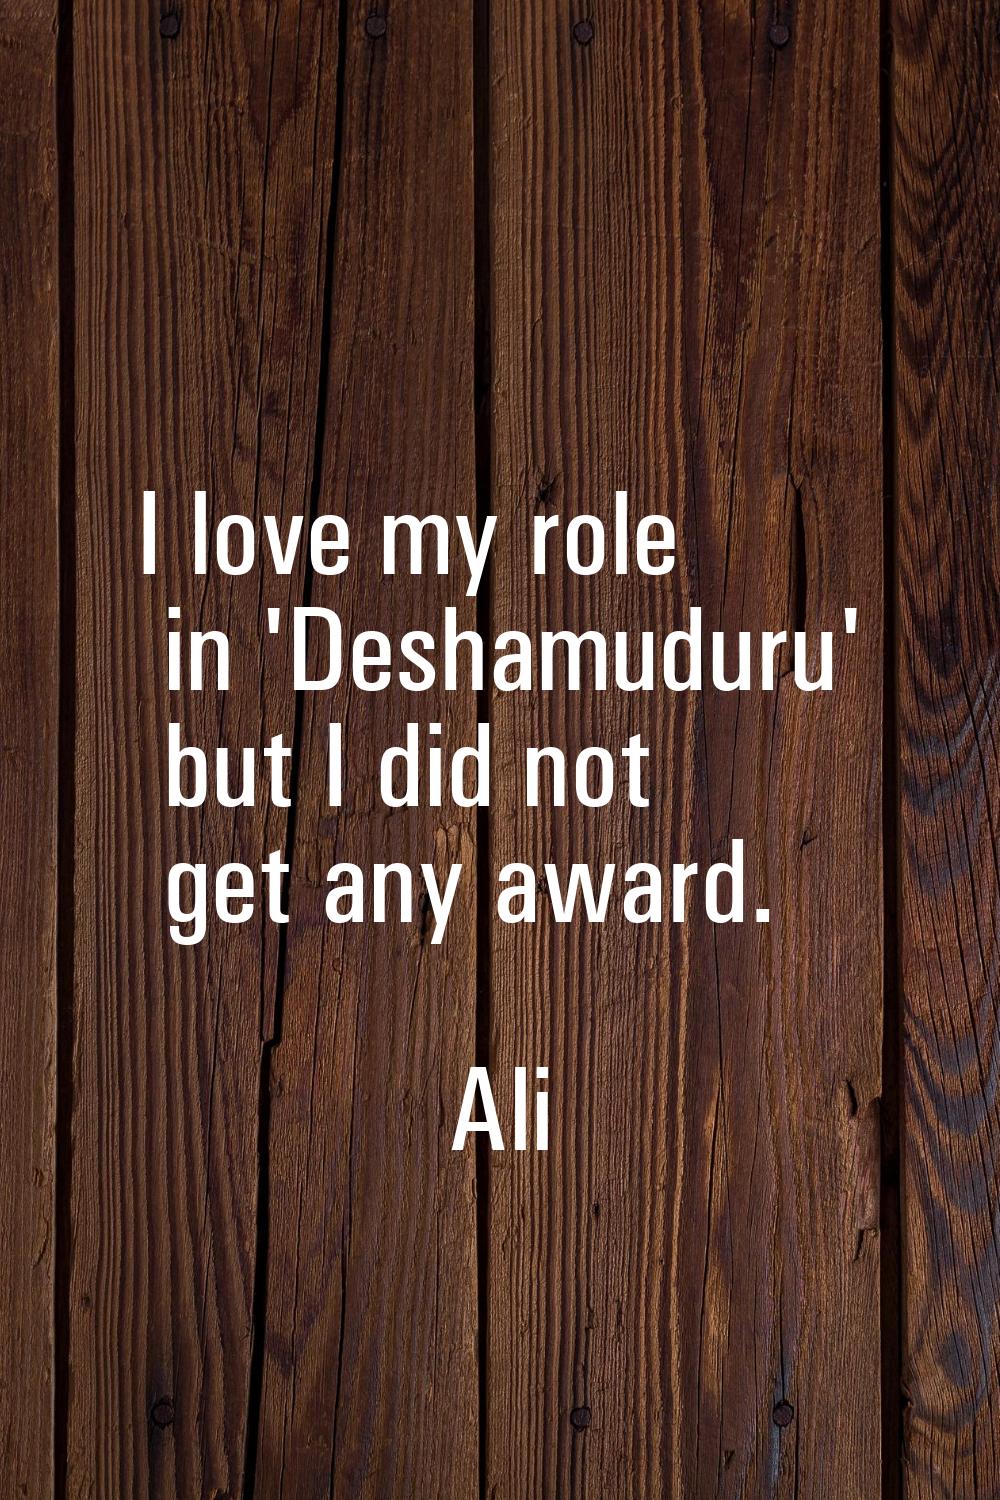 I love my role in 'Deshamuduru' but I did not get any award.